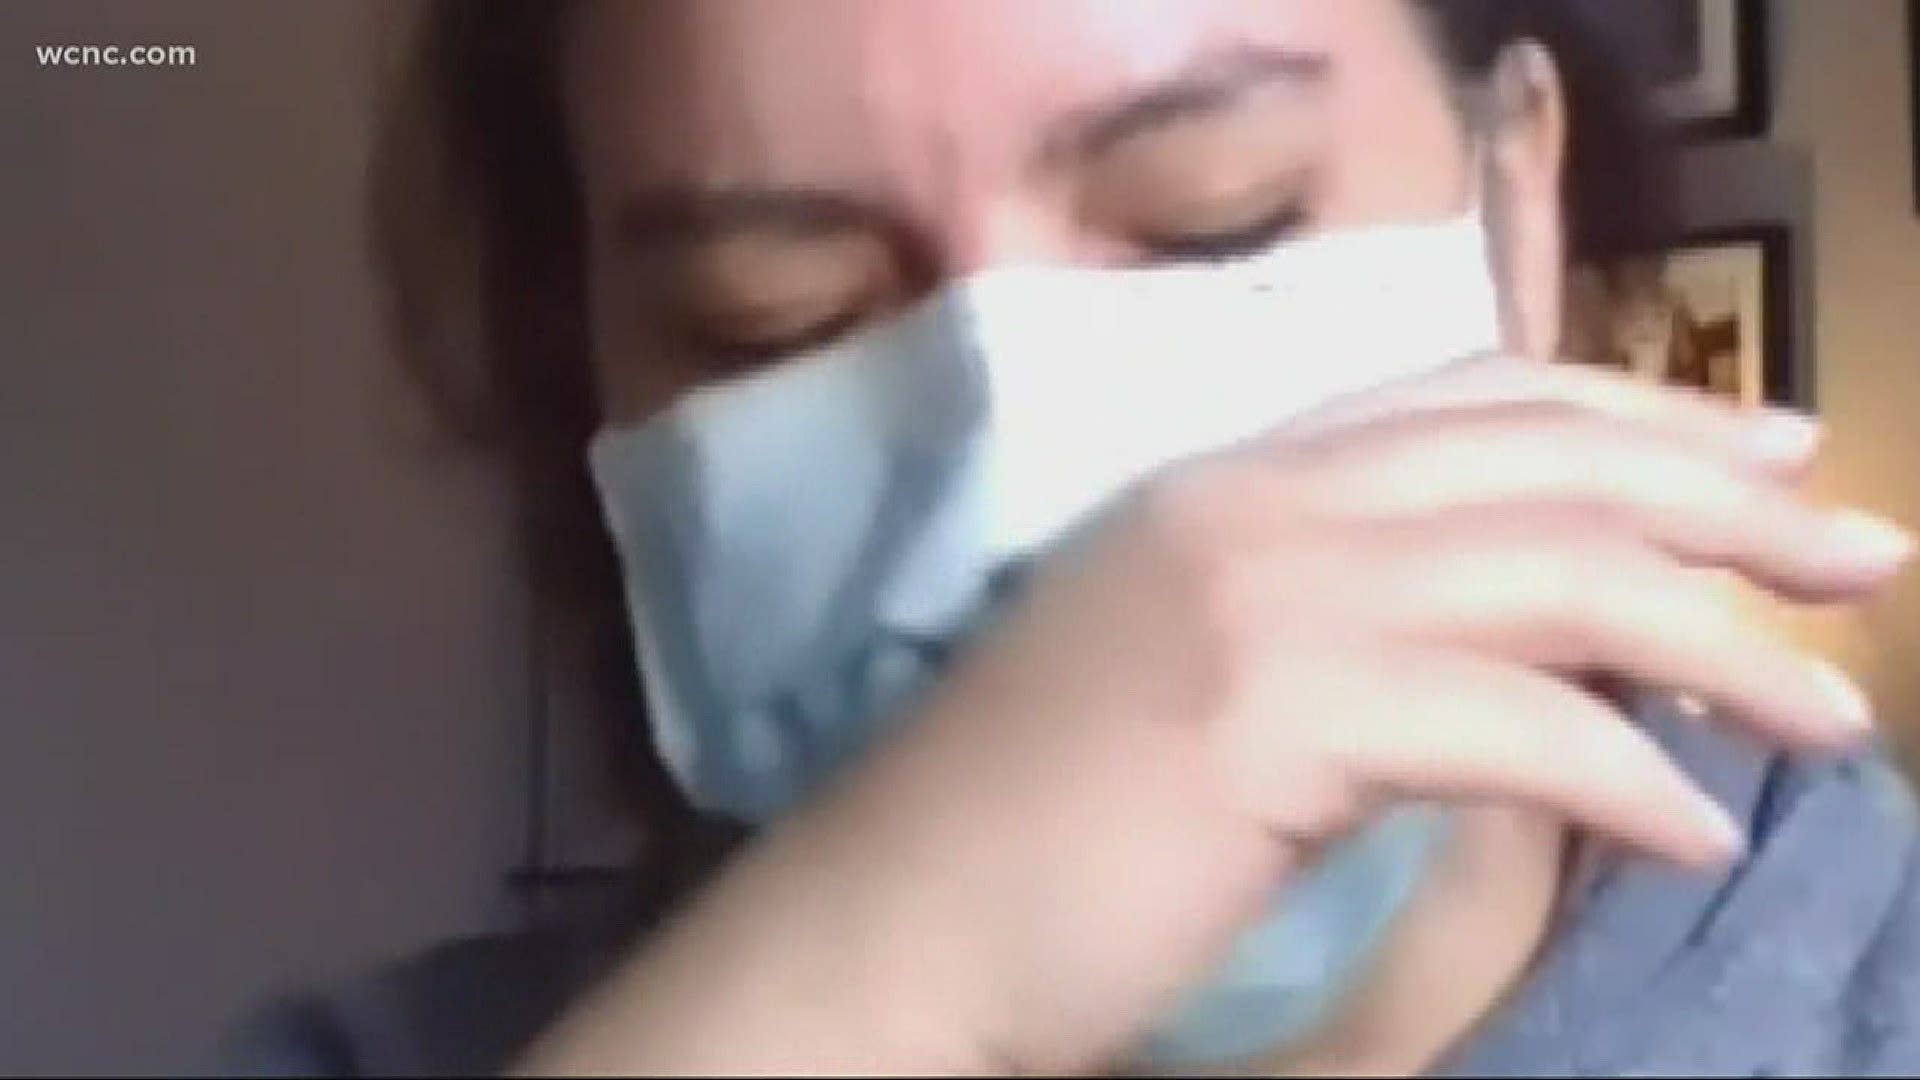 Test results Thursday night confirmed a Charlotte woman's fears. Despite staying home, her fever, headache, trouble breathing and coughing are from COVID-19.